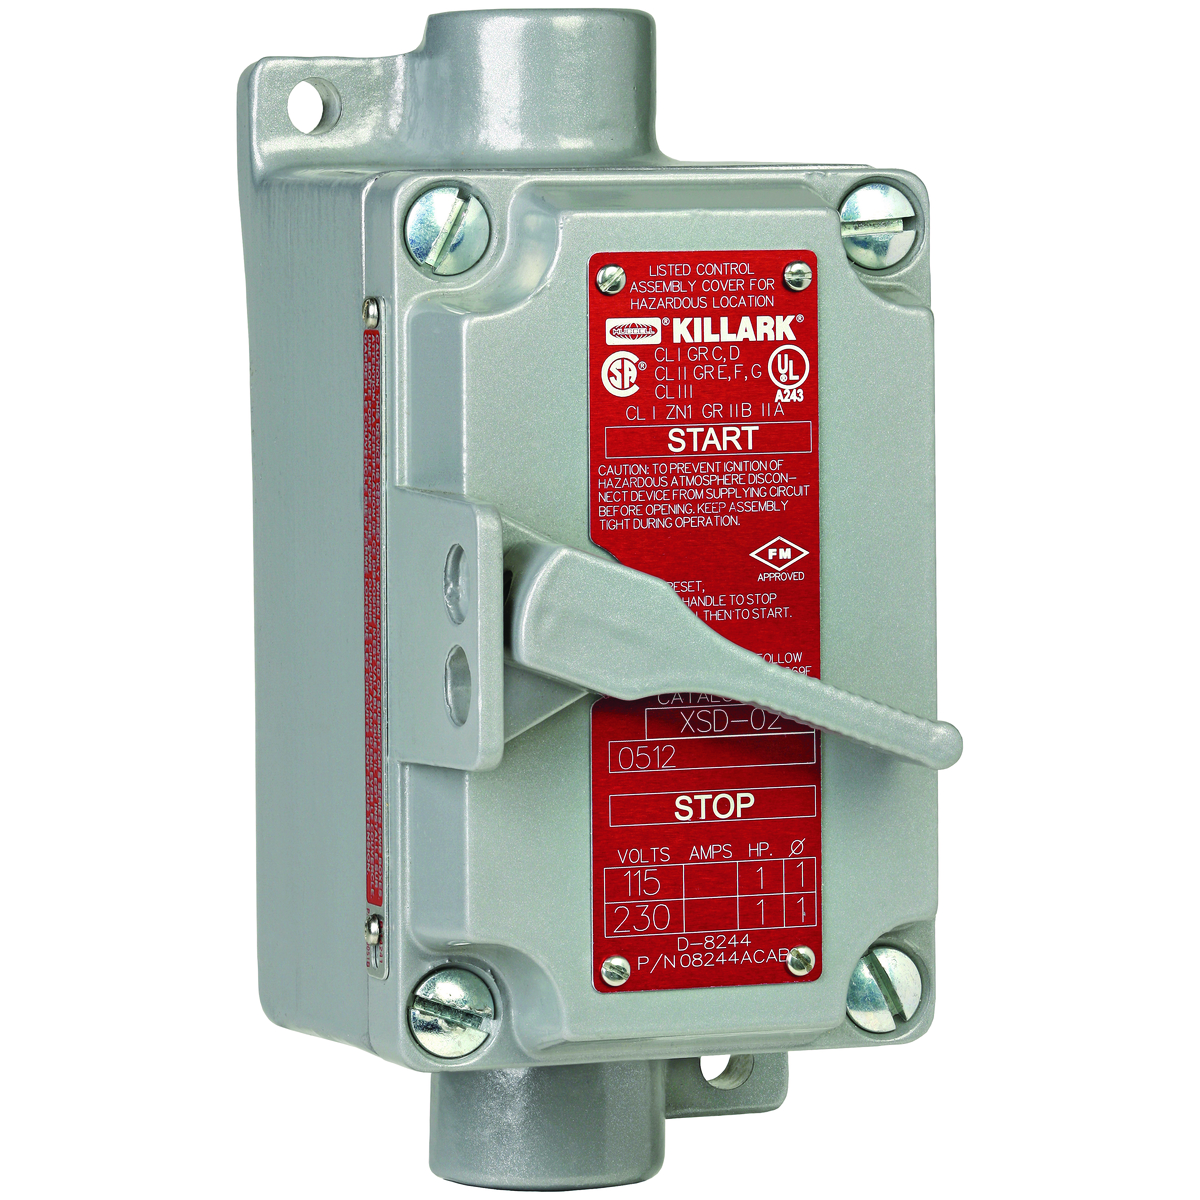 XSD SERIES - ALUMINUM SINGLE GANG 2-POLE, SINGLE PHASE MANUAL MOTORSTARTING SWITCH COVER AND SWITCH ASSEMBLY - WITH OVERLOAD PROTECTION